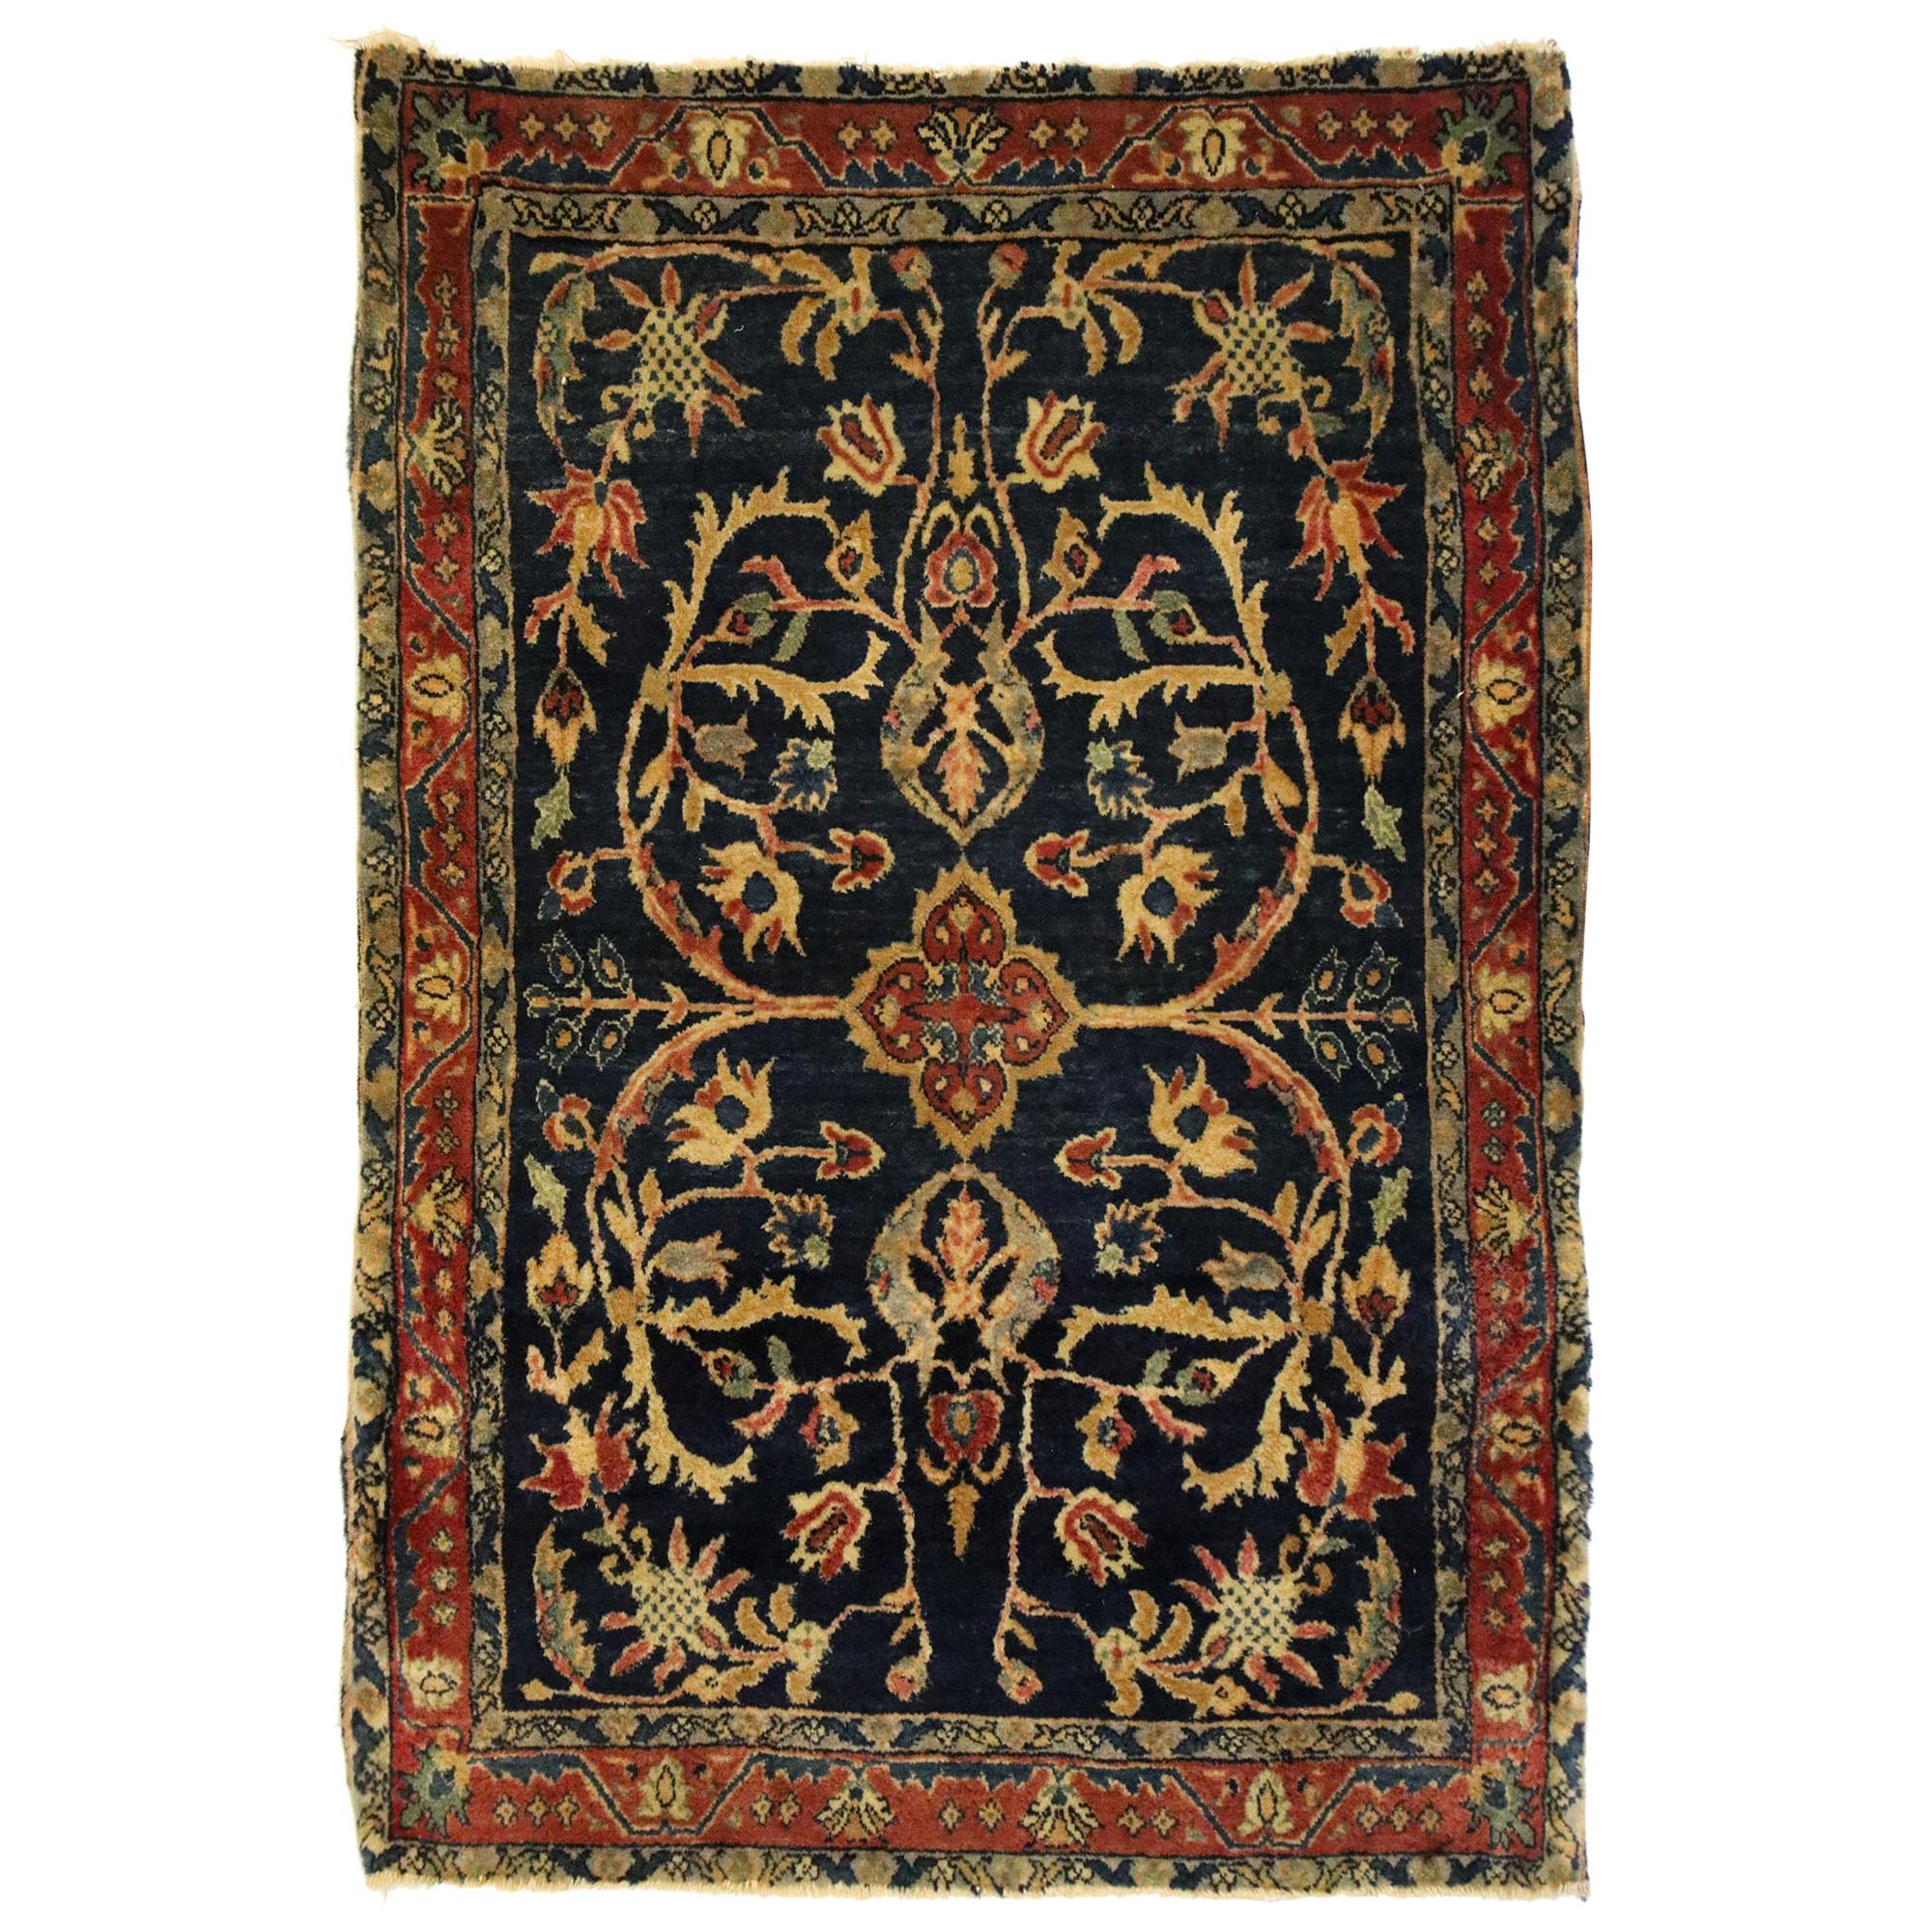 Antique Persian Mohajeran Sarouk Rug with Federal Style